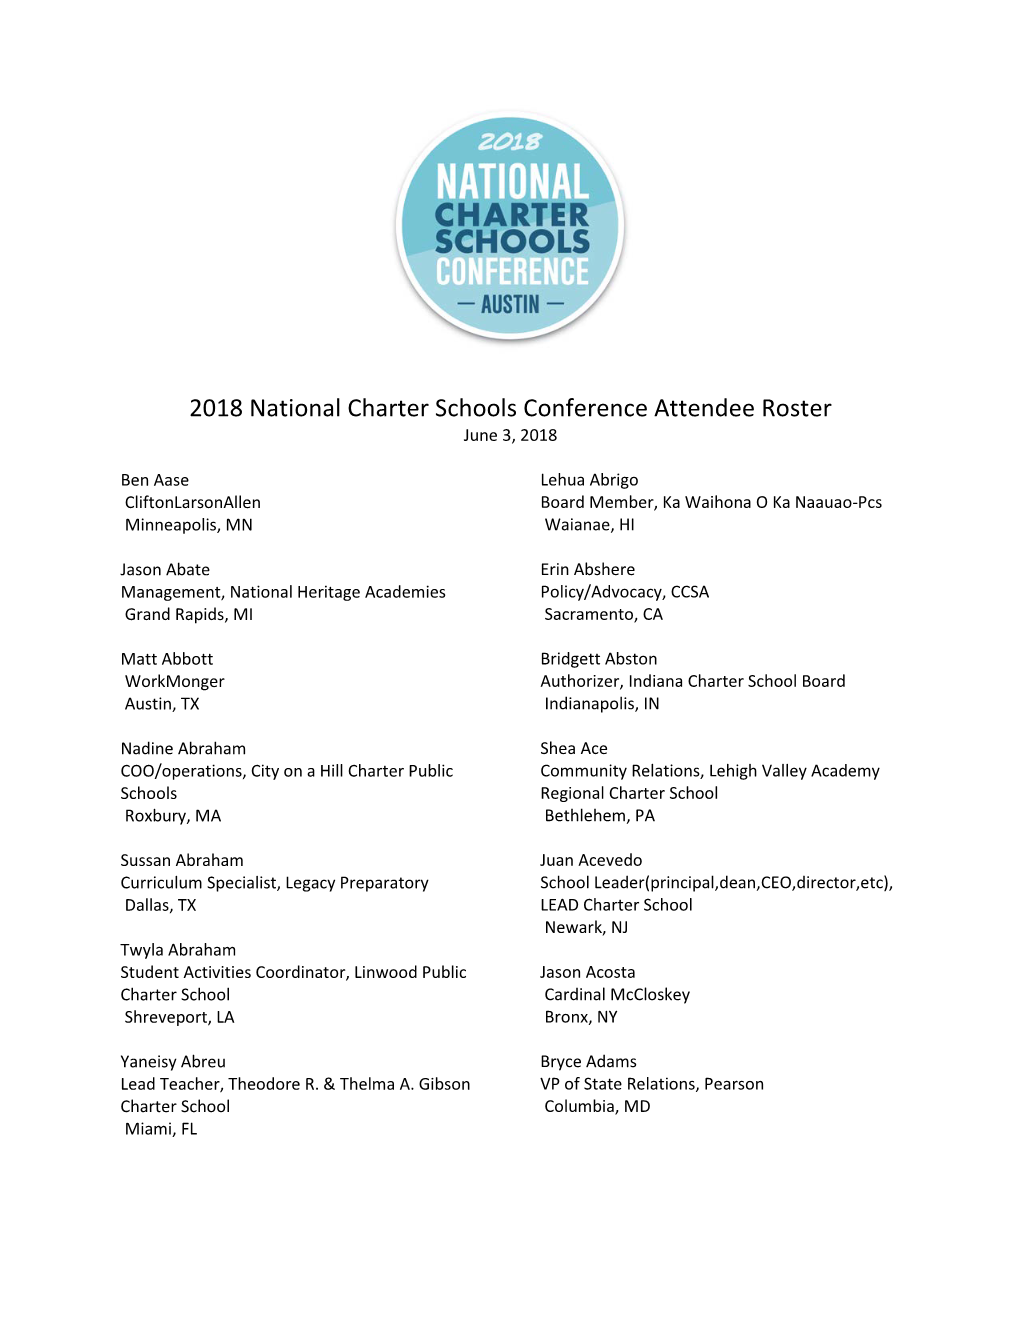 2018 National Charter Schools Conference Attendee Roster June 3, 2018